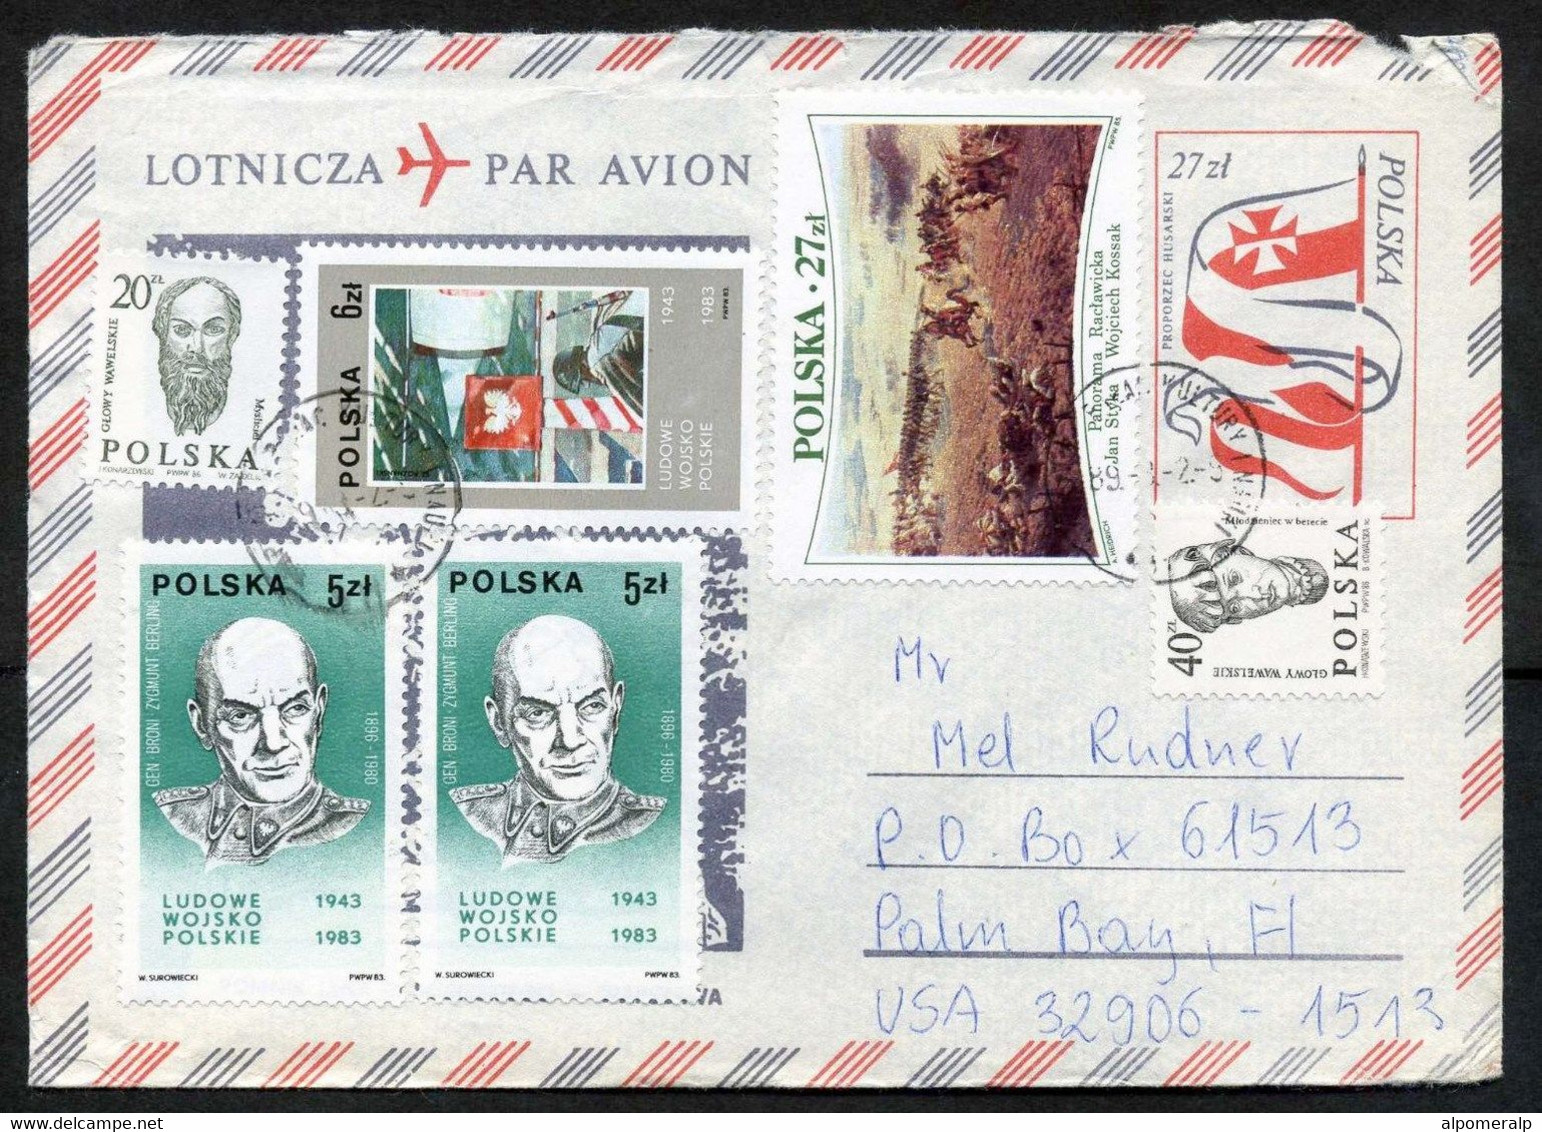 Poland 1989 Air Mail Cover Used To USA | General Zygmunt Berling,Battle Scene, Military Forces | Paintings | Sculptures - Aviones